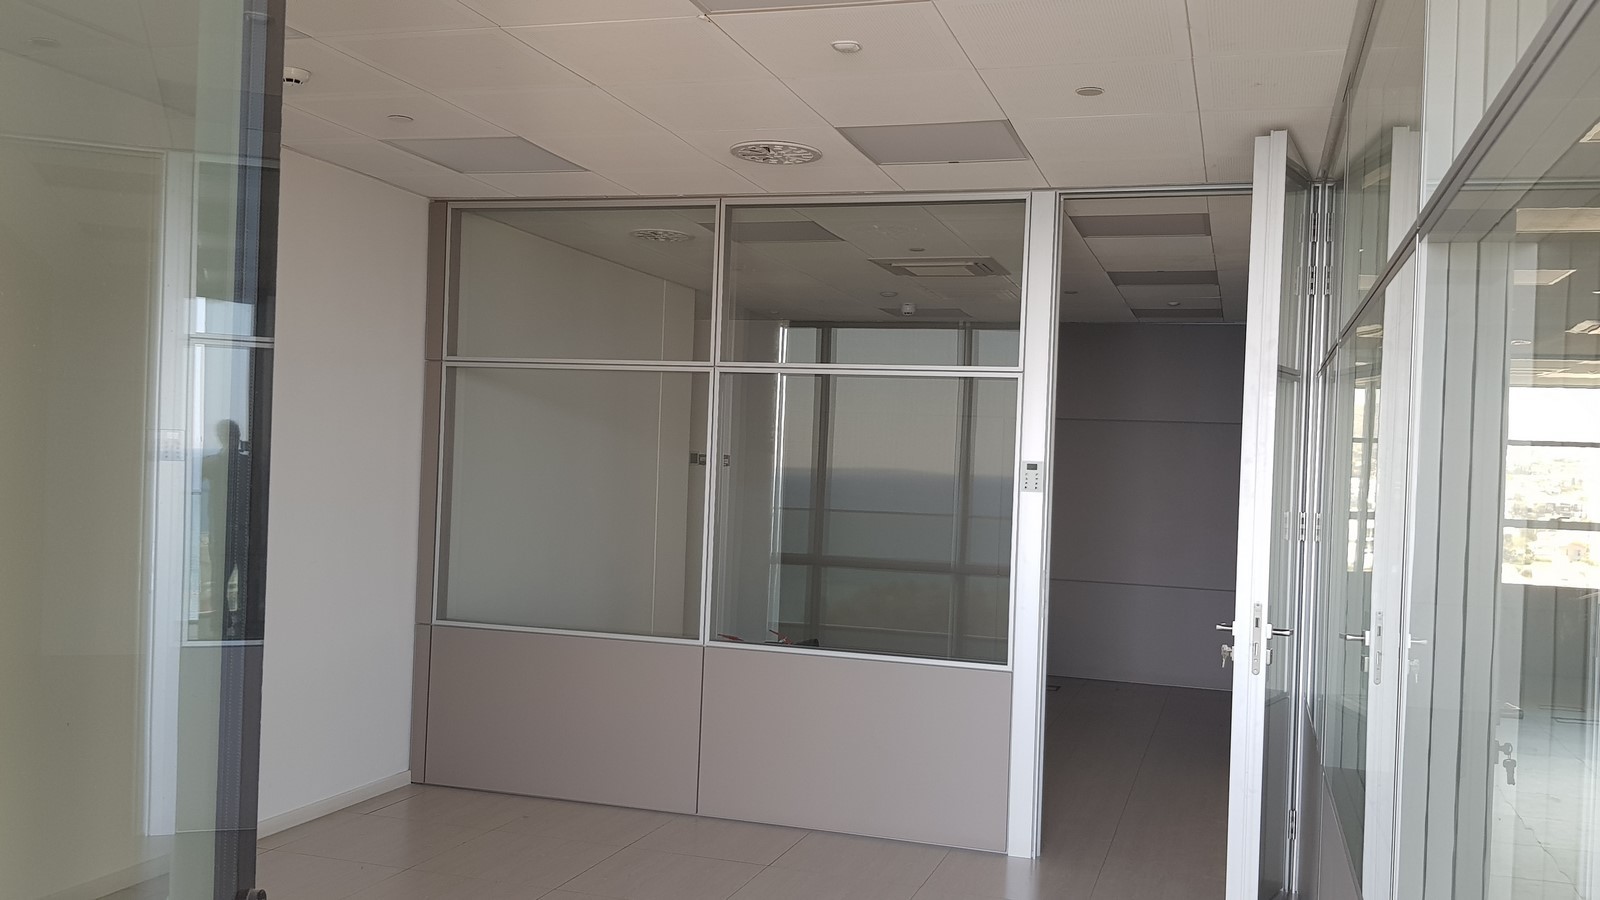 Office – 188sqm for long term rent, Neapolis area, Limassol